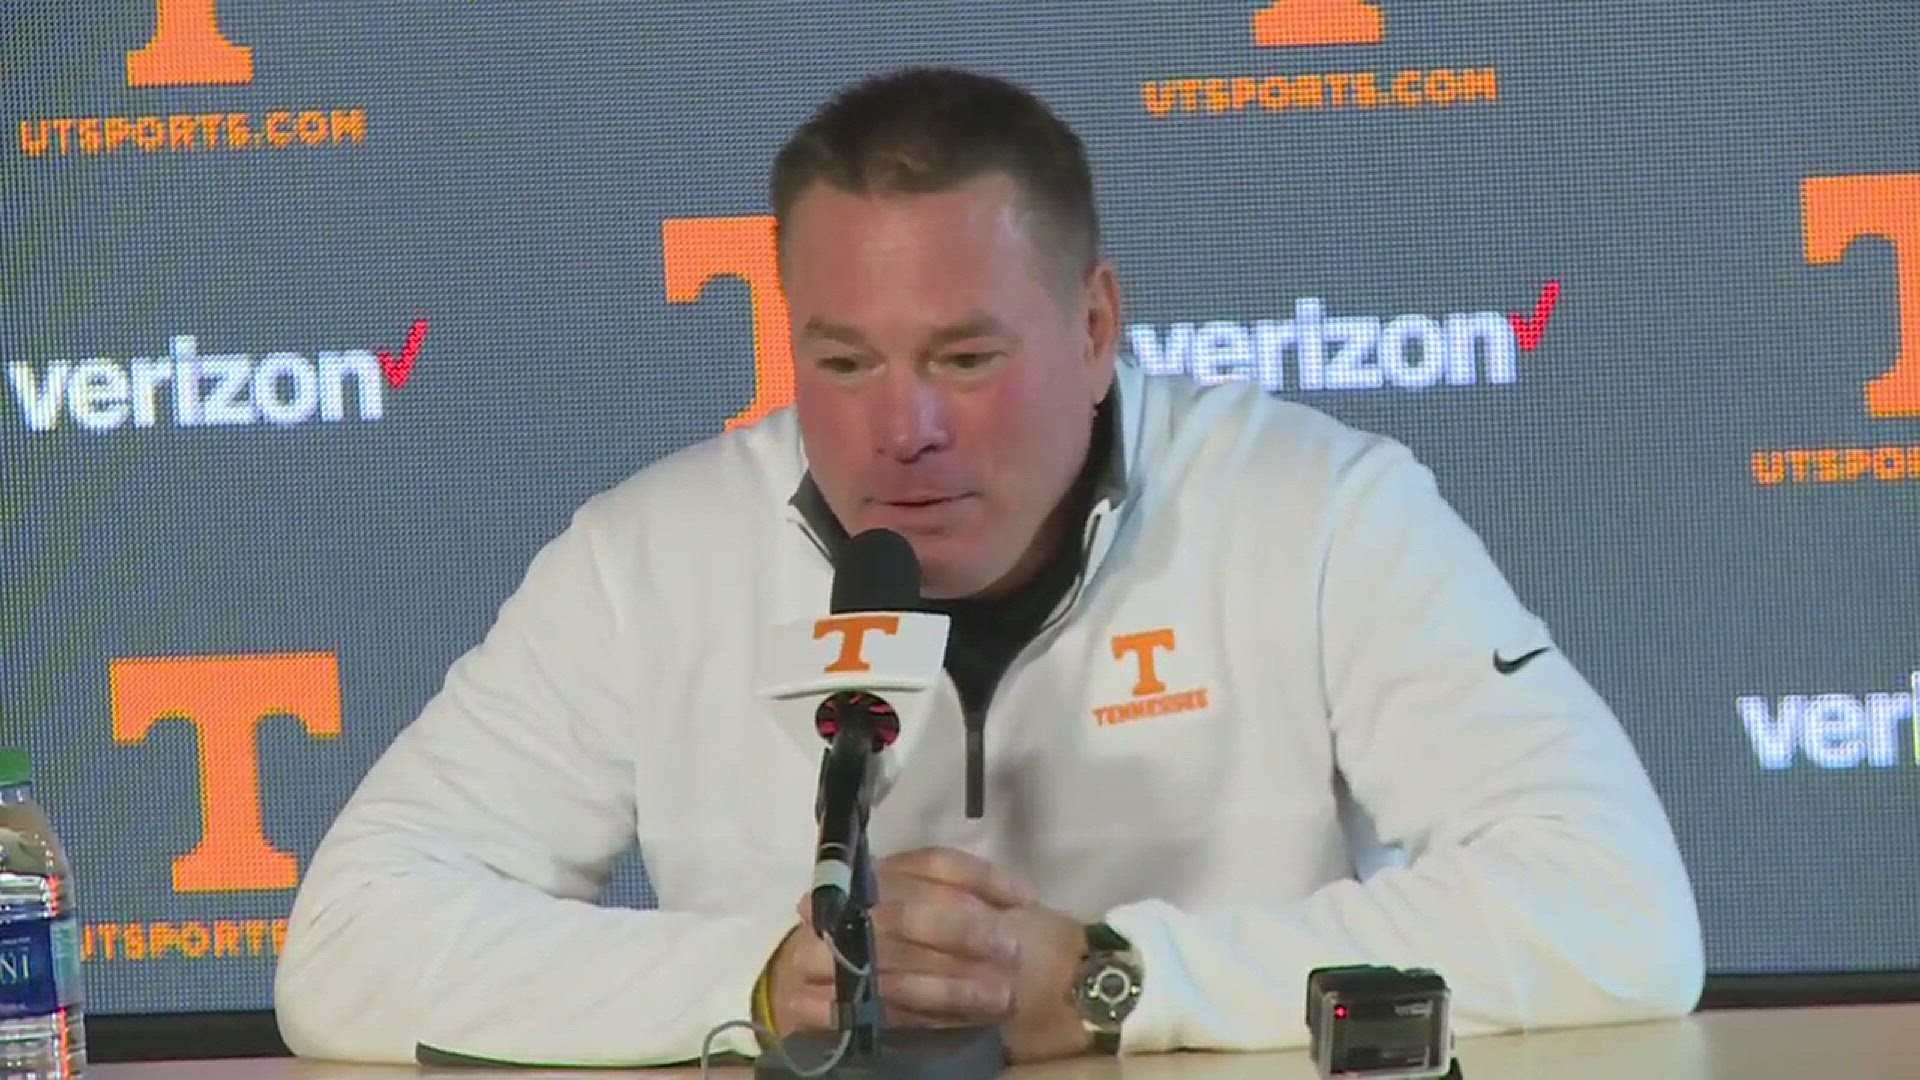 Butch Jones along with Tennessee football players Jalen Reeves-Maybin, Alvin Kamara, Derek Barnett and Alex Jones visited children and their families in the hospital in Chattanooga on Wednesday morning.